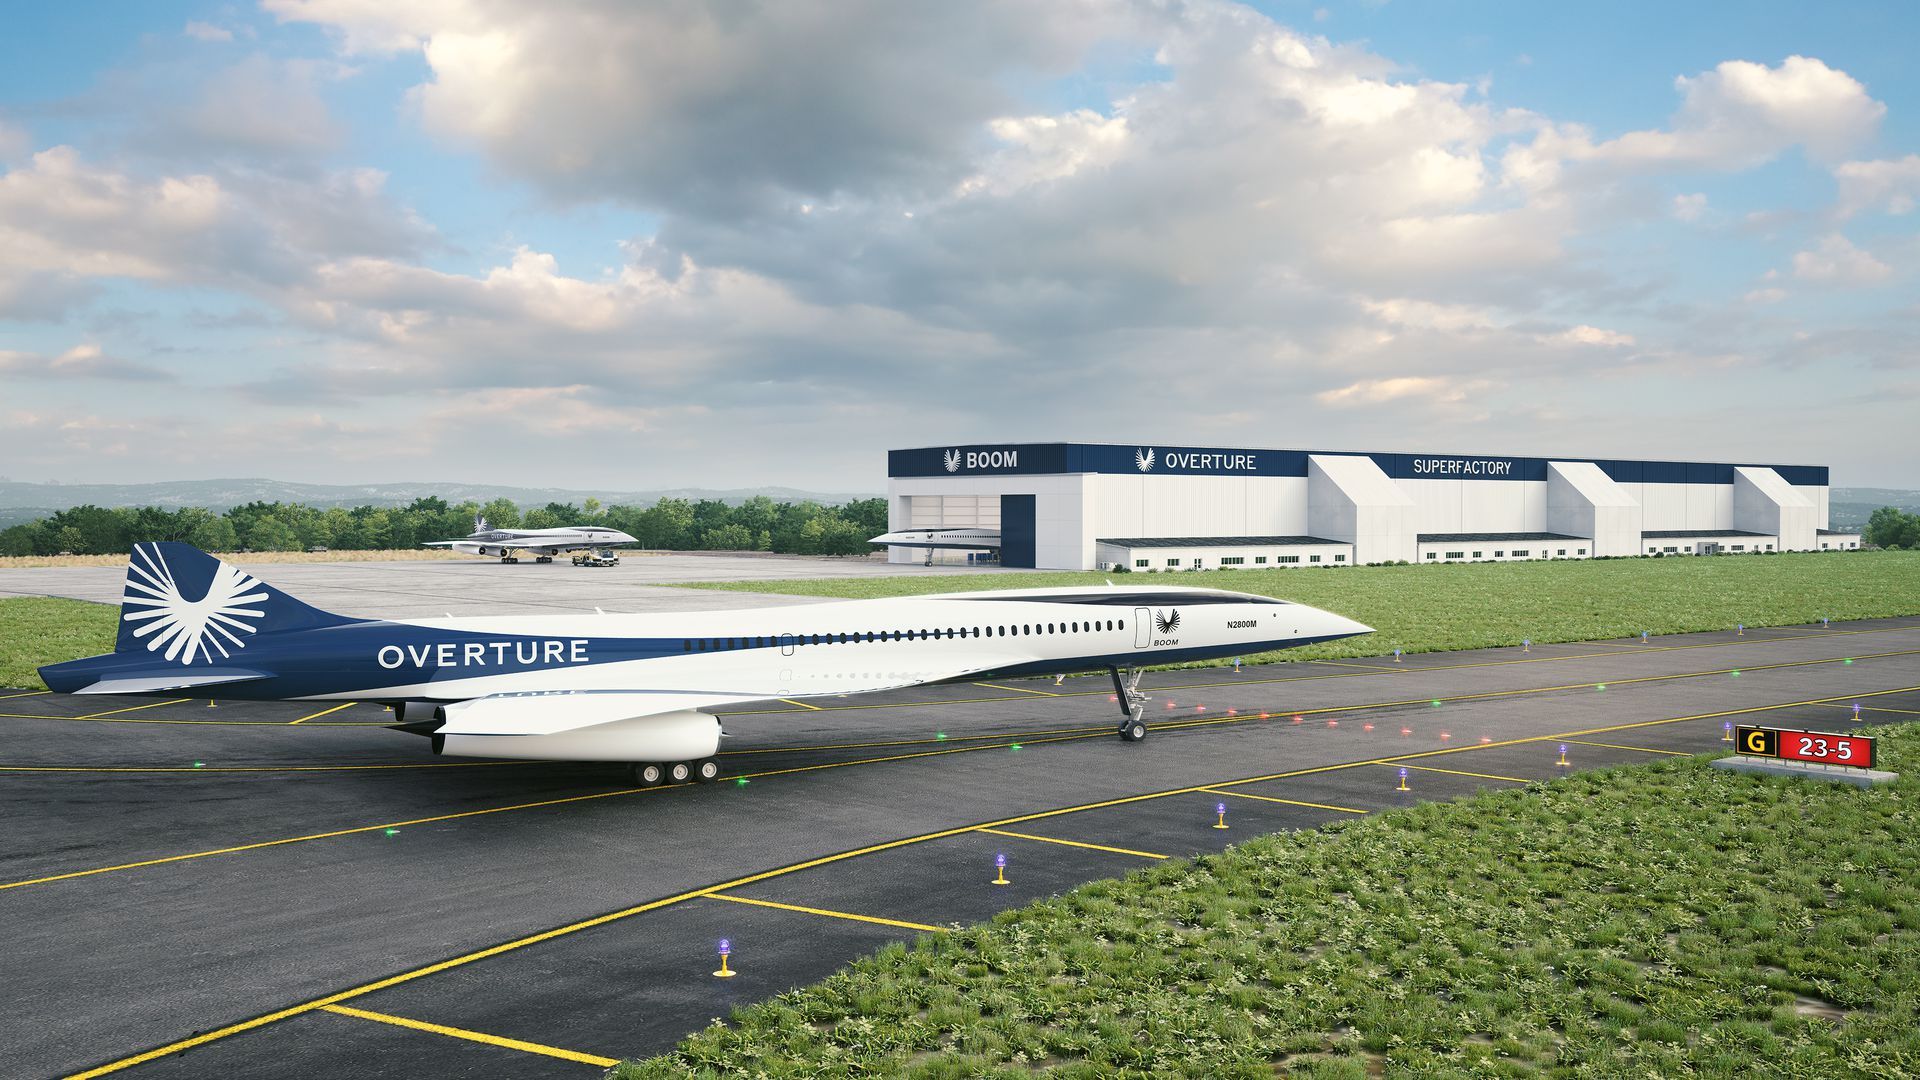 A rendering of the under-construction Boom Supersonic jet factory.